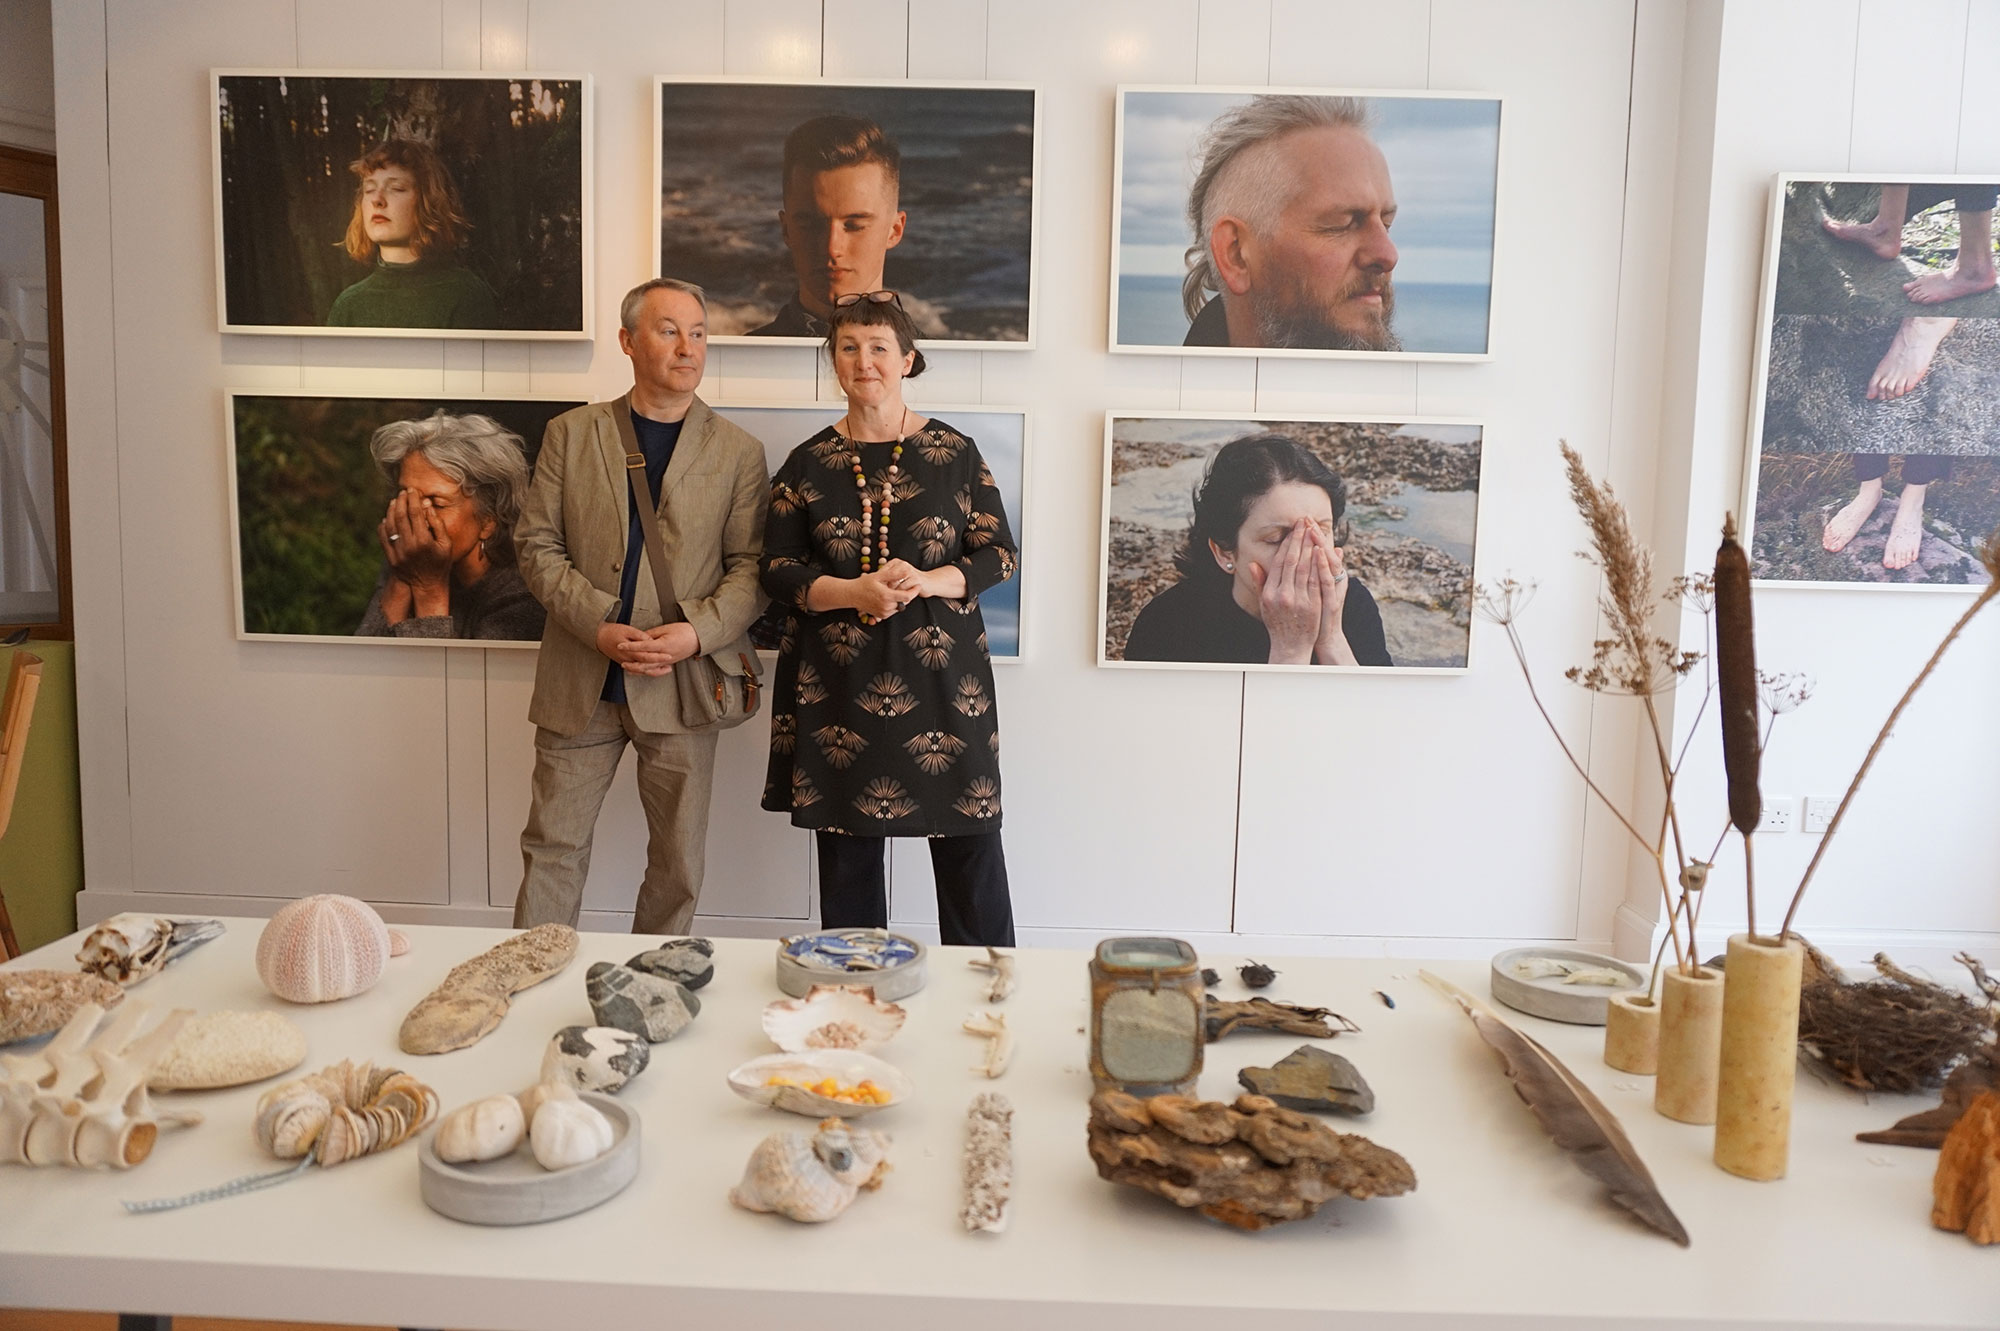 Dalziel + Scullion with work they created as part of their John Muir Residency in Dunbar in 2018